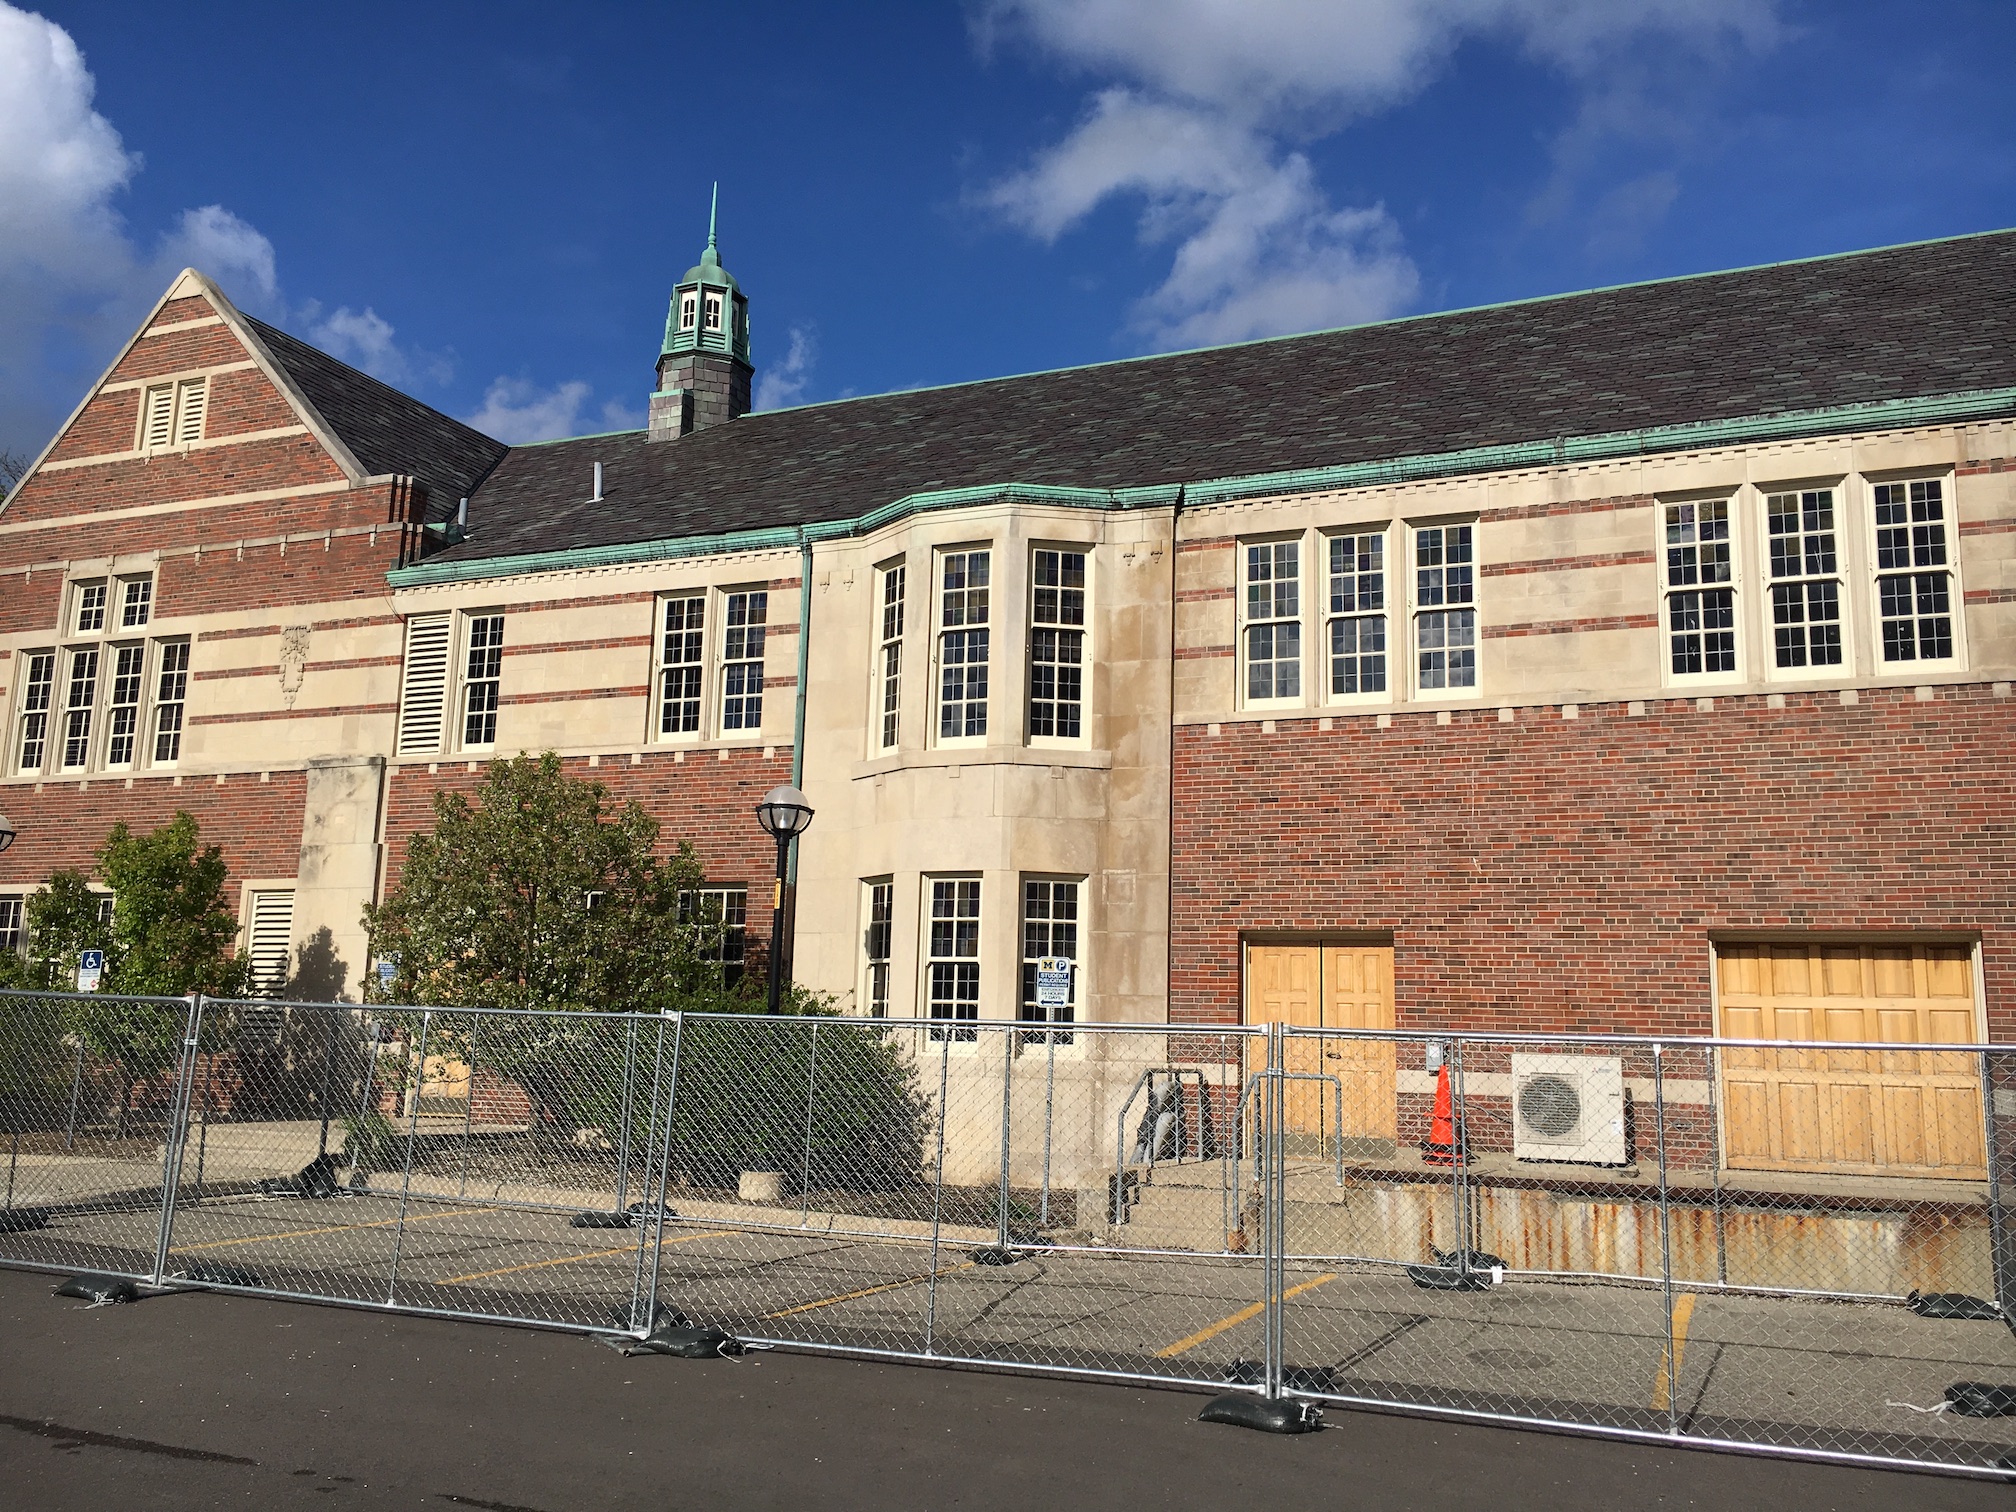 Construction fences are up as roof replacement begins soon